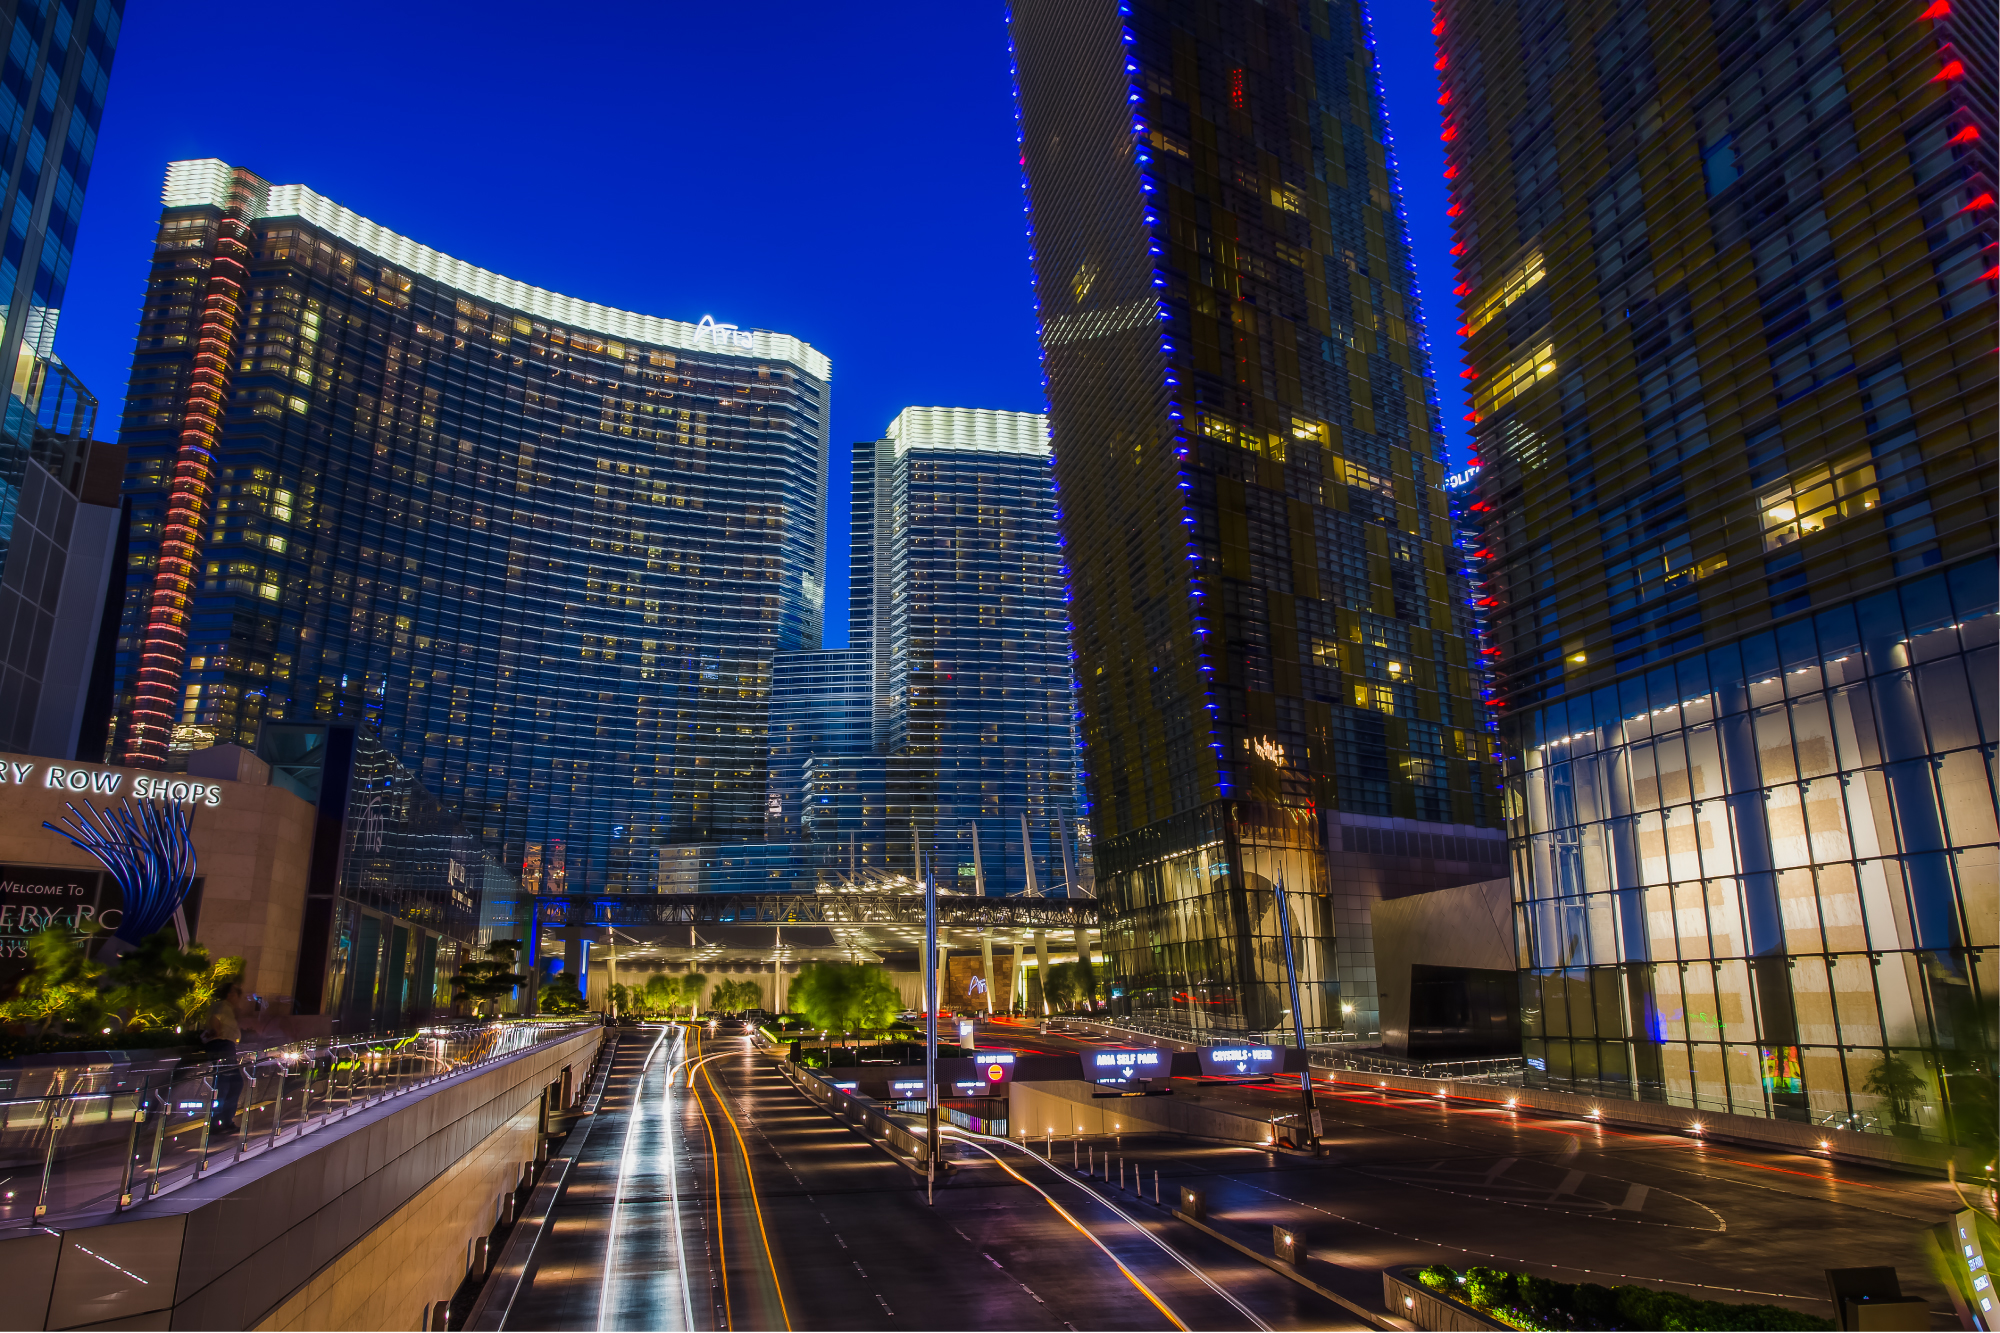 HDR Photography Workshop: Las Vegas Aria HDR | Pt.2 | RAW Preparation and HDR Export